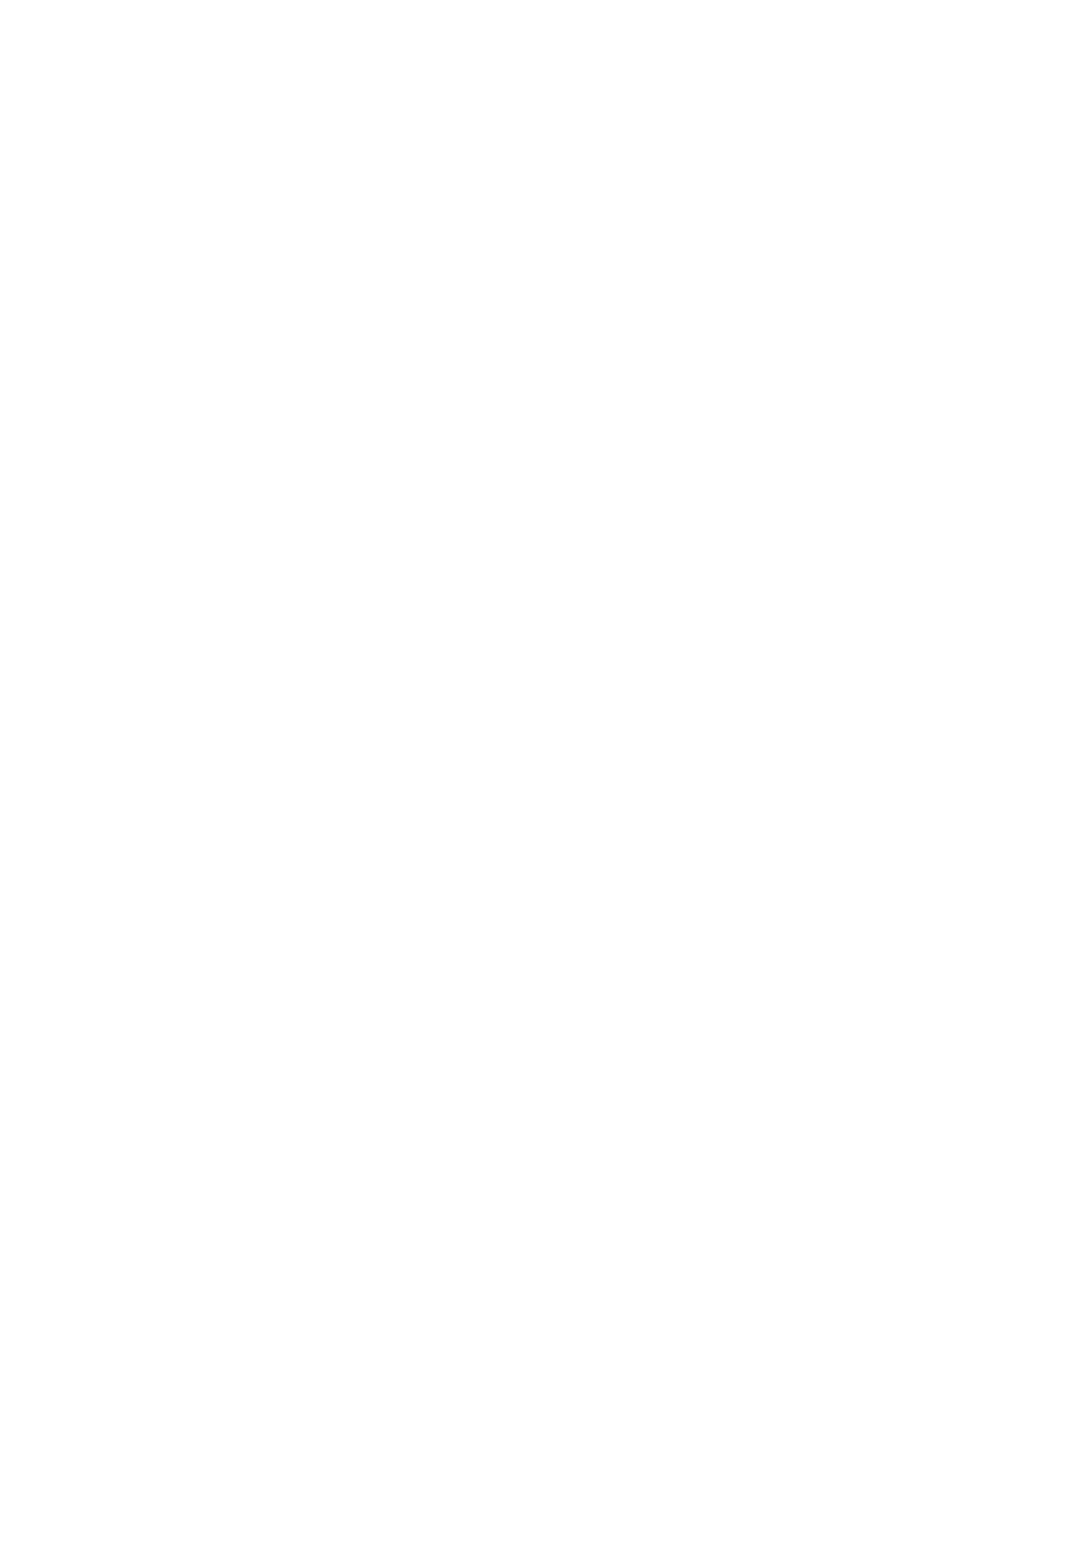 PagerDuty logo for dark backgrounds (transparent PNG)